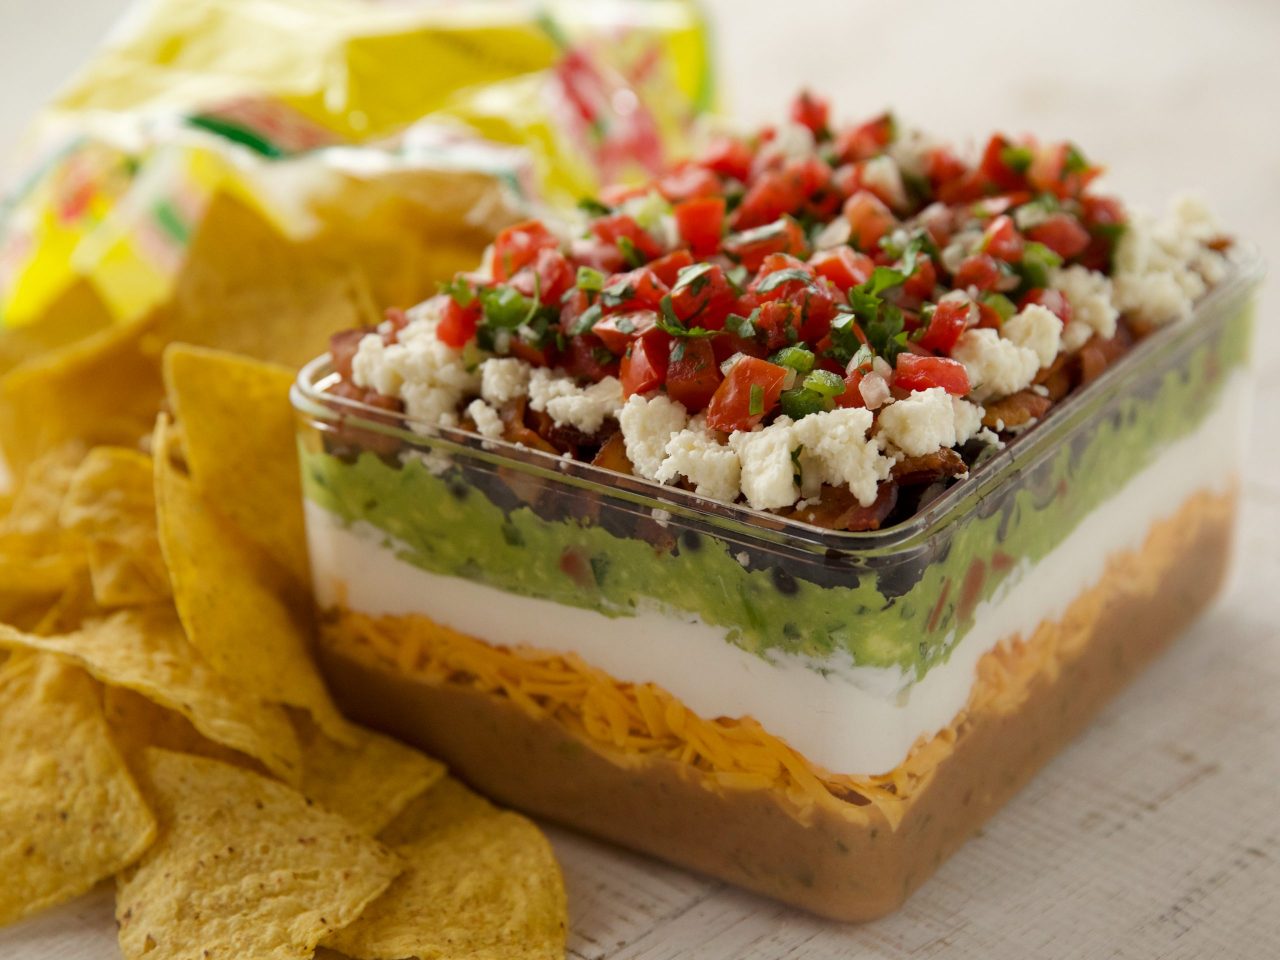 Ree Drummond's Eight-Layer Dip, as seen on The Pioneer Woman.